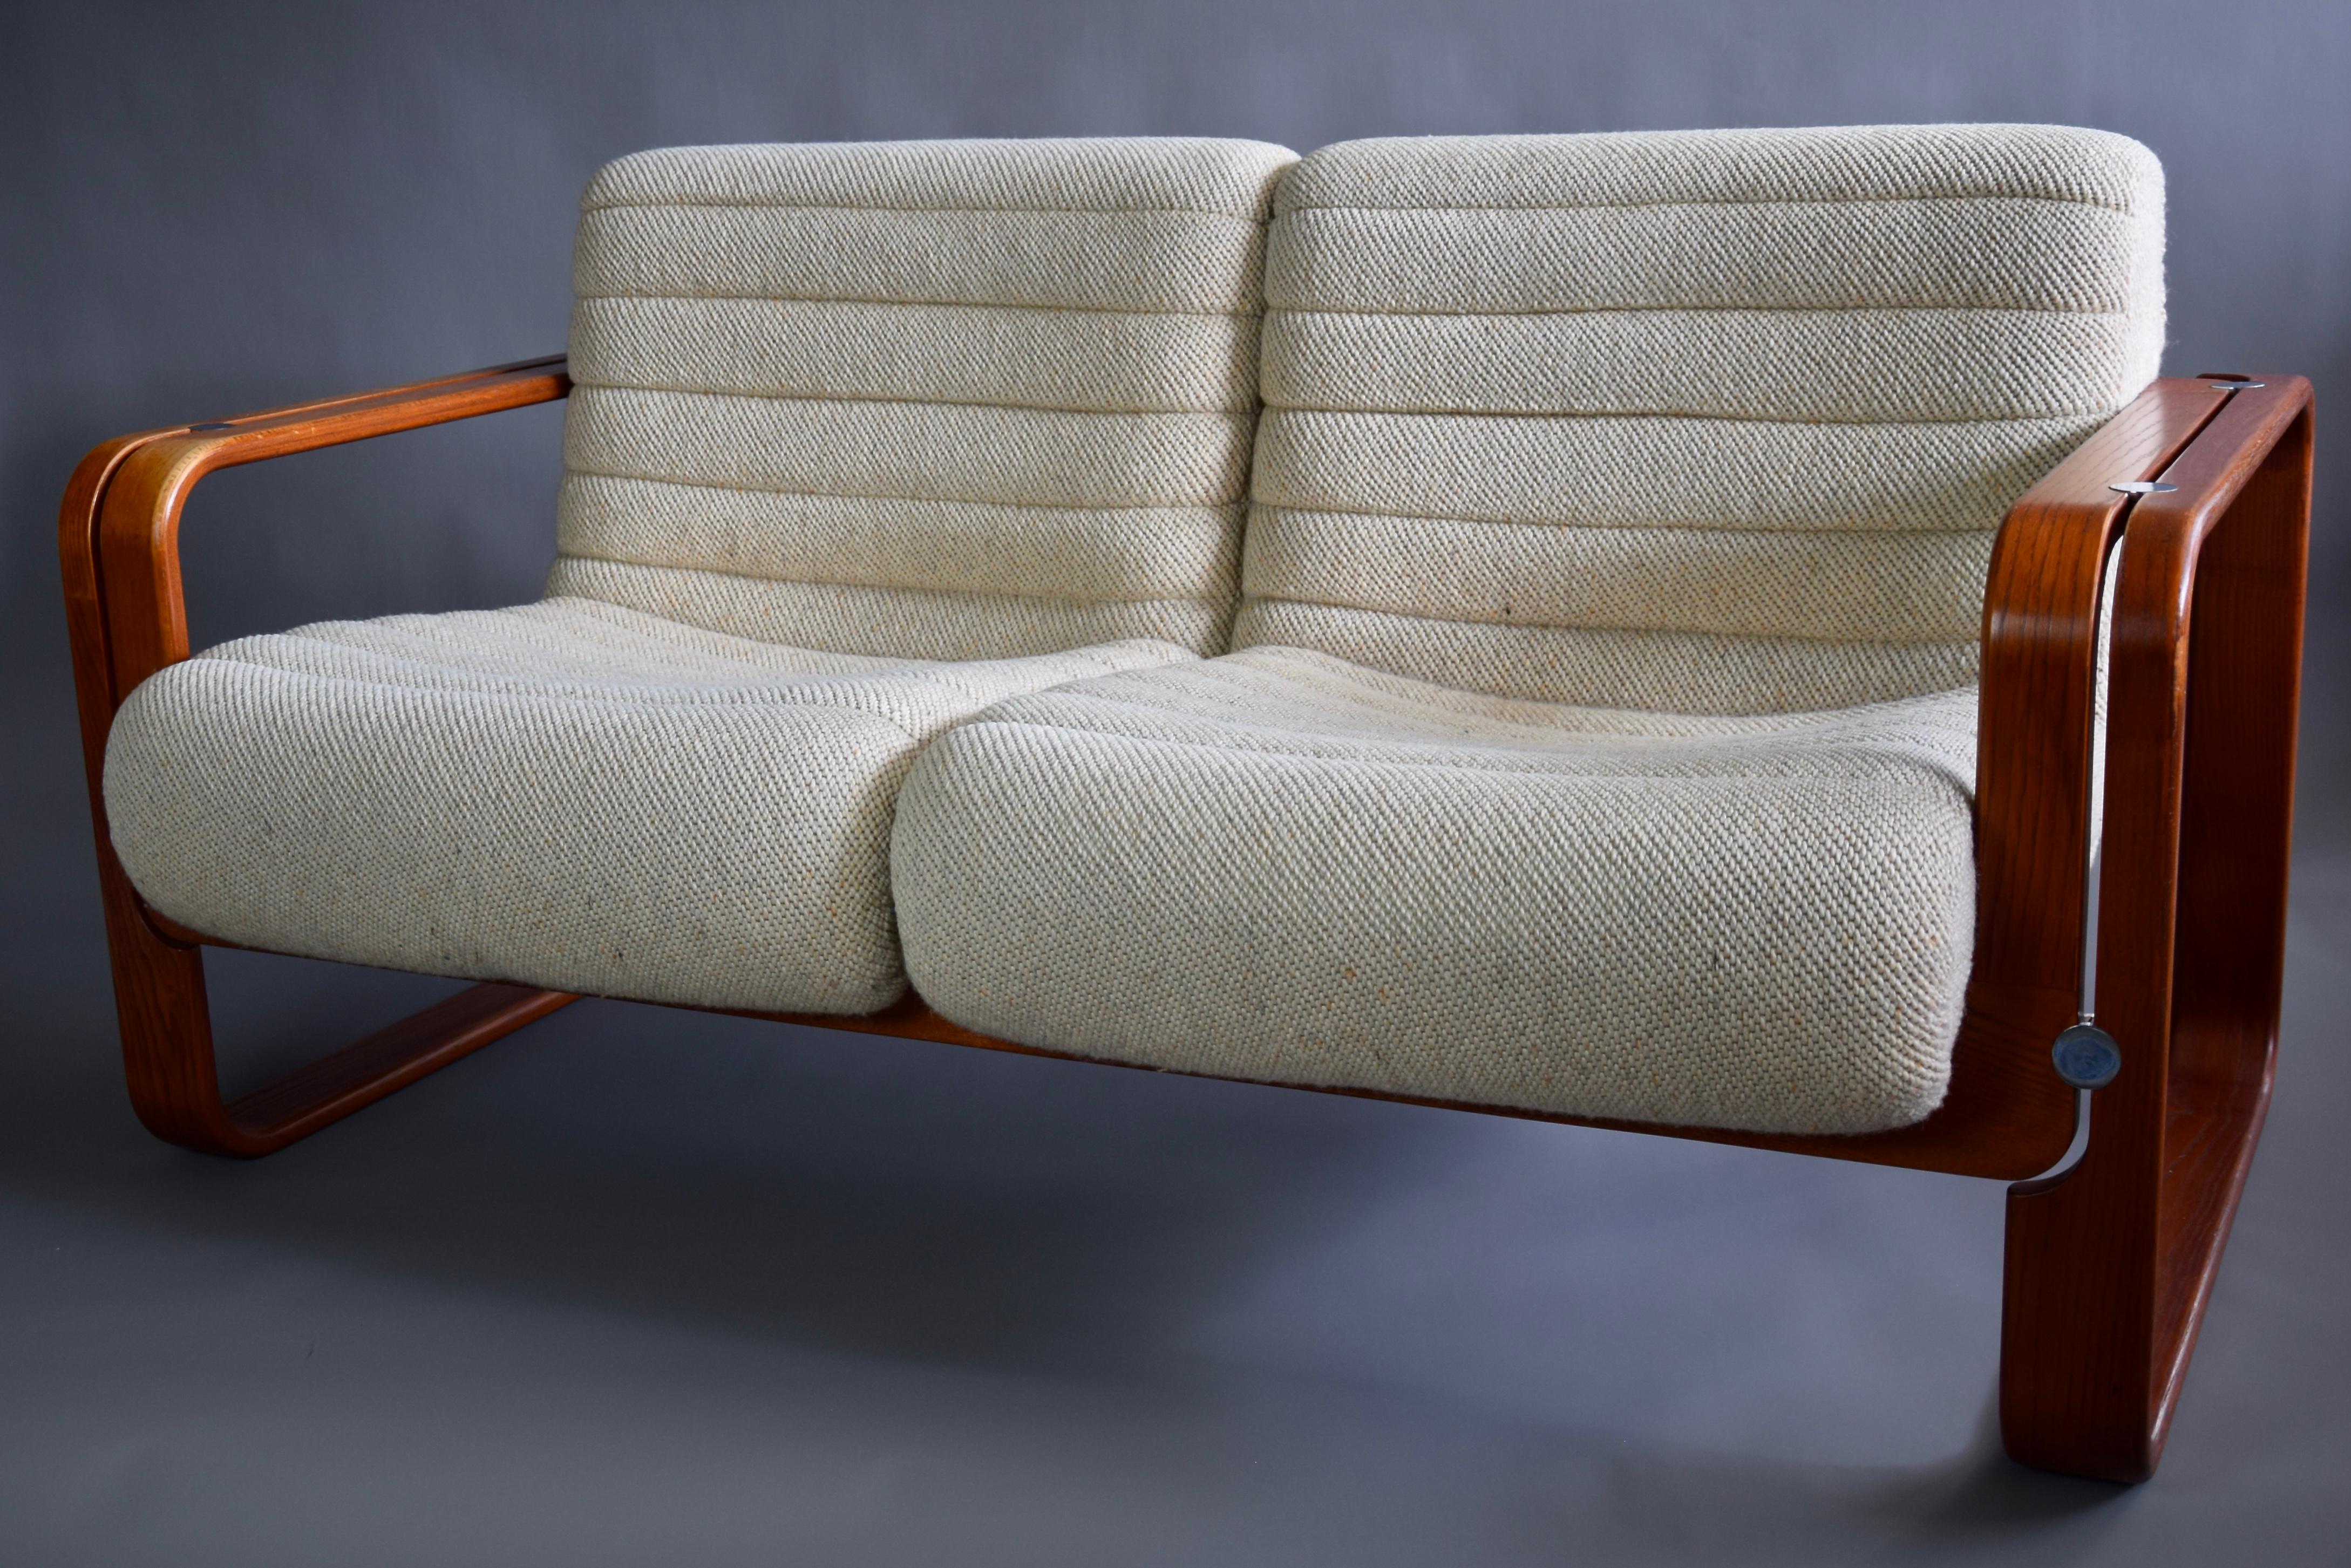 Late 20th Century Mid-Century Modern Ecru Upholstery and Wooden Frame Two Seater by Giroflex For Sale